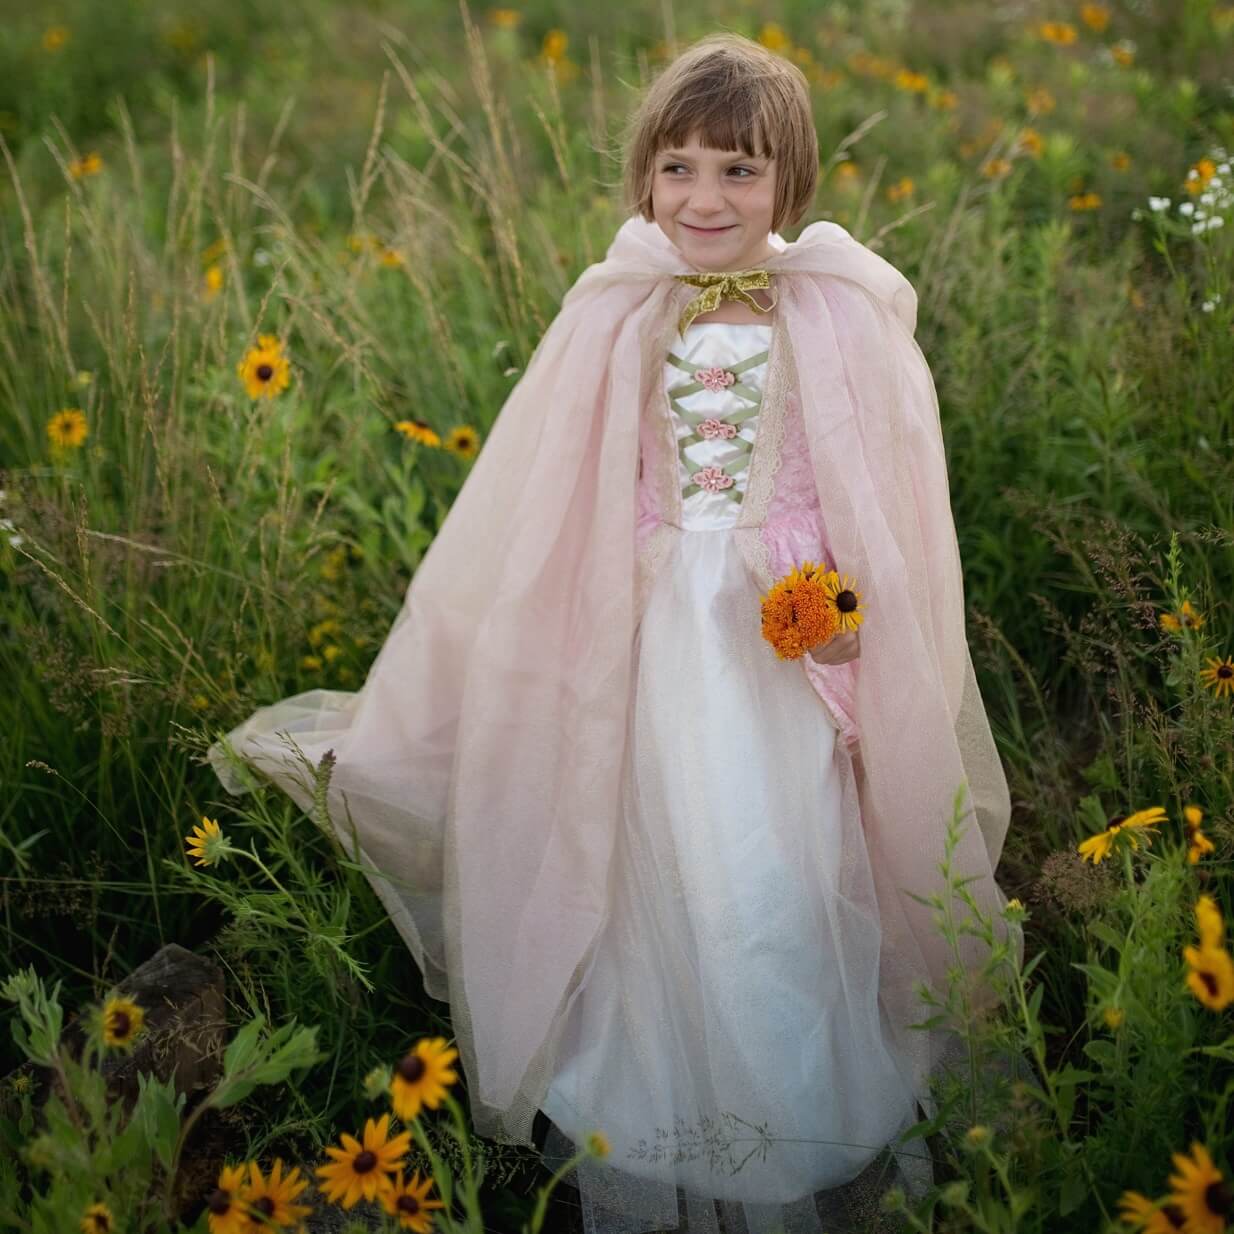 Girl wearing pink and gold princess cape in a field holding an orange flower